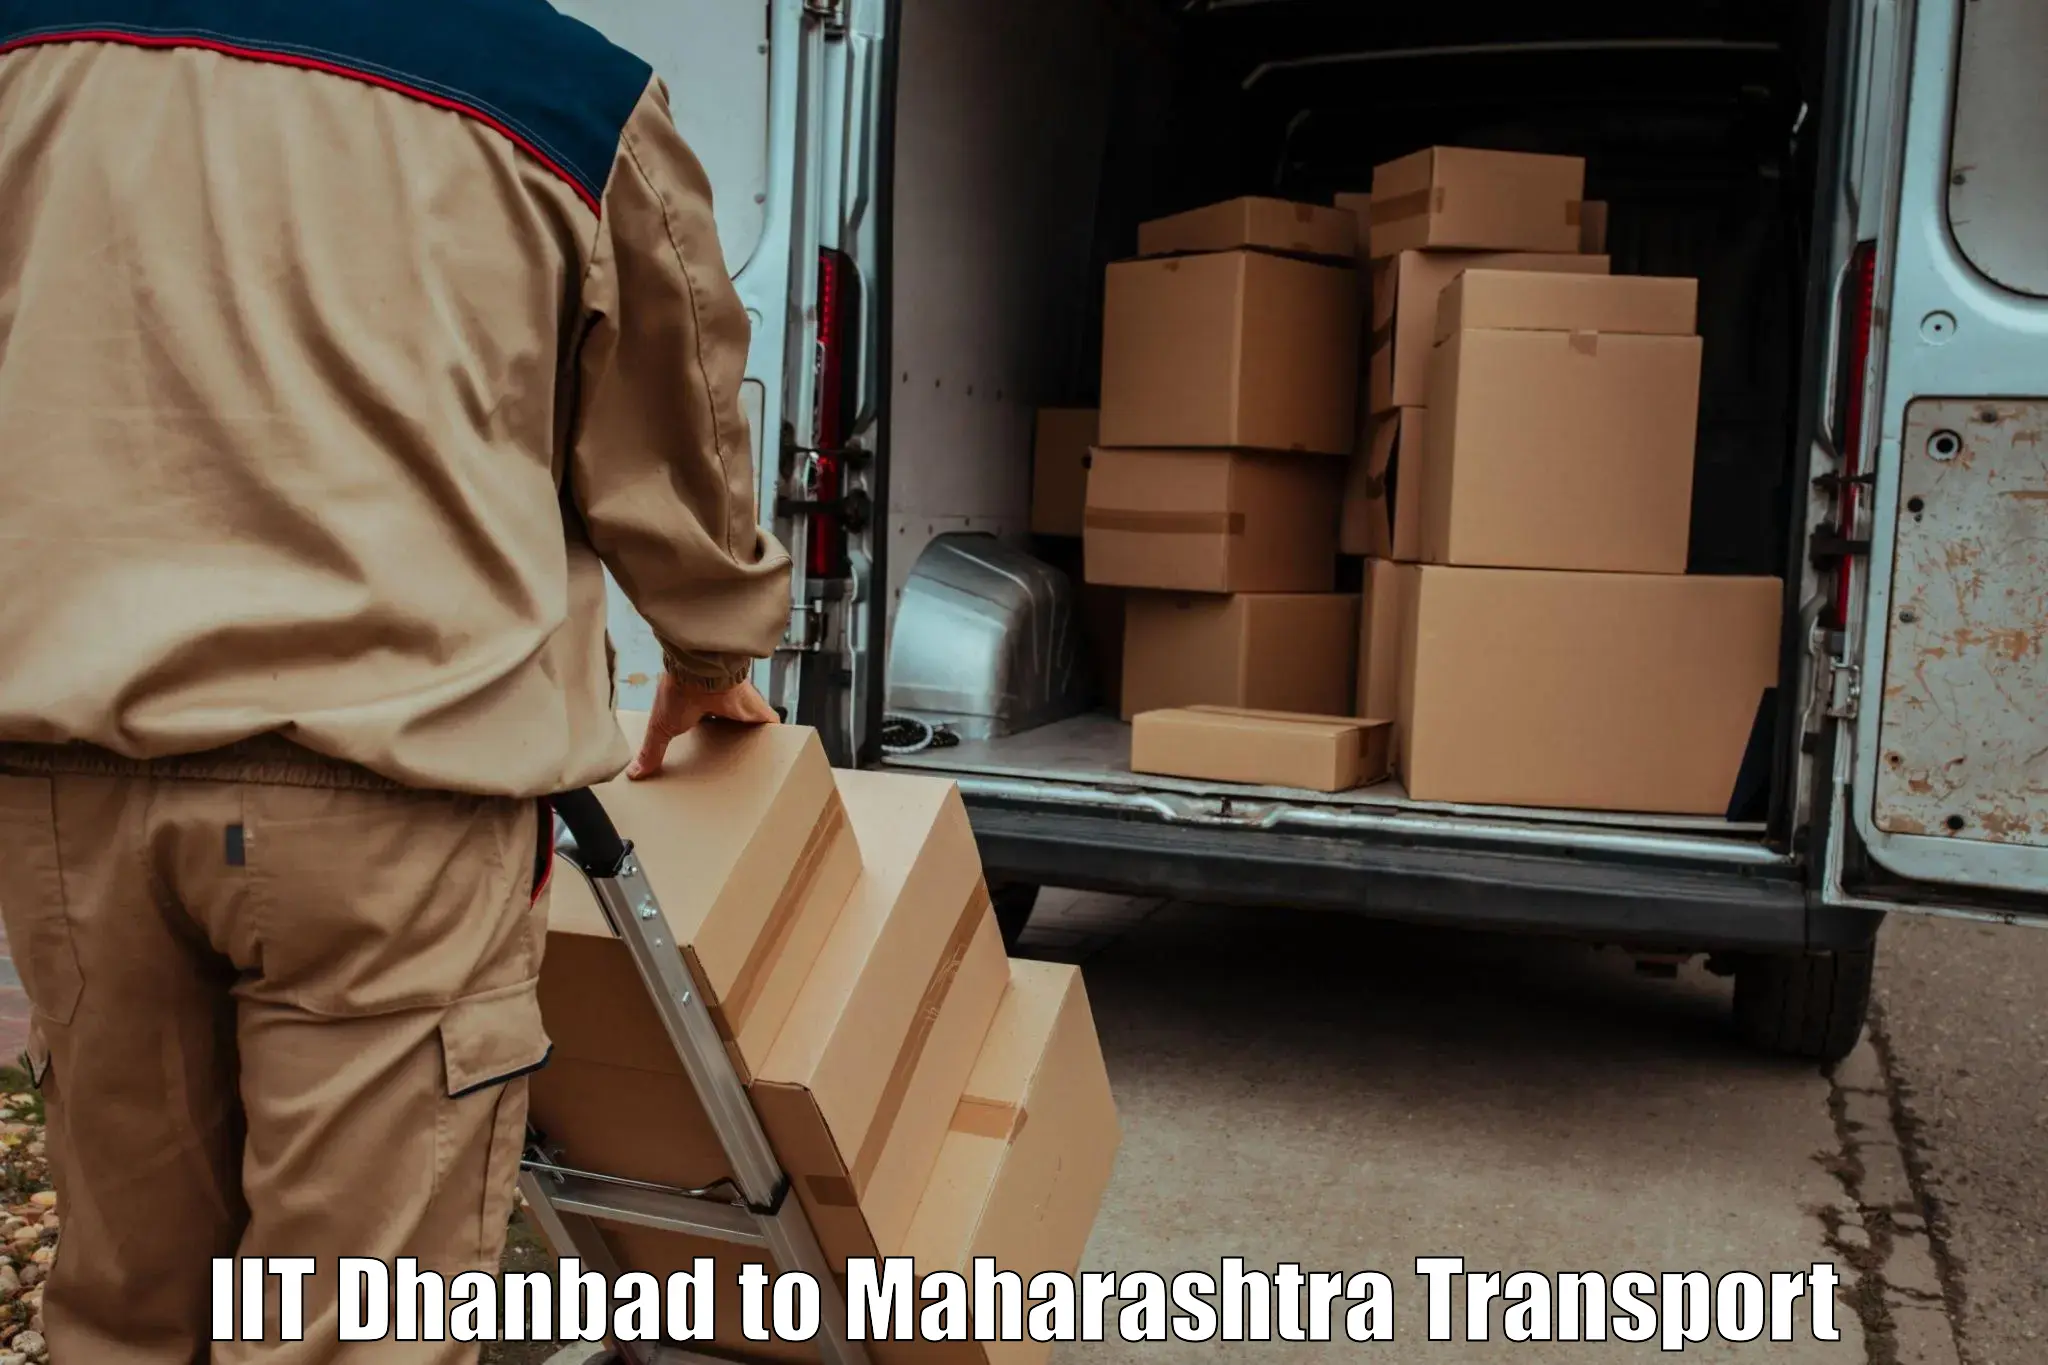 Interstate transport services IIT Dhanbad to Khamgaon